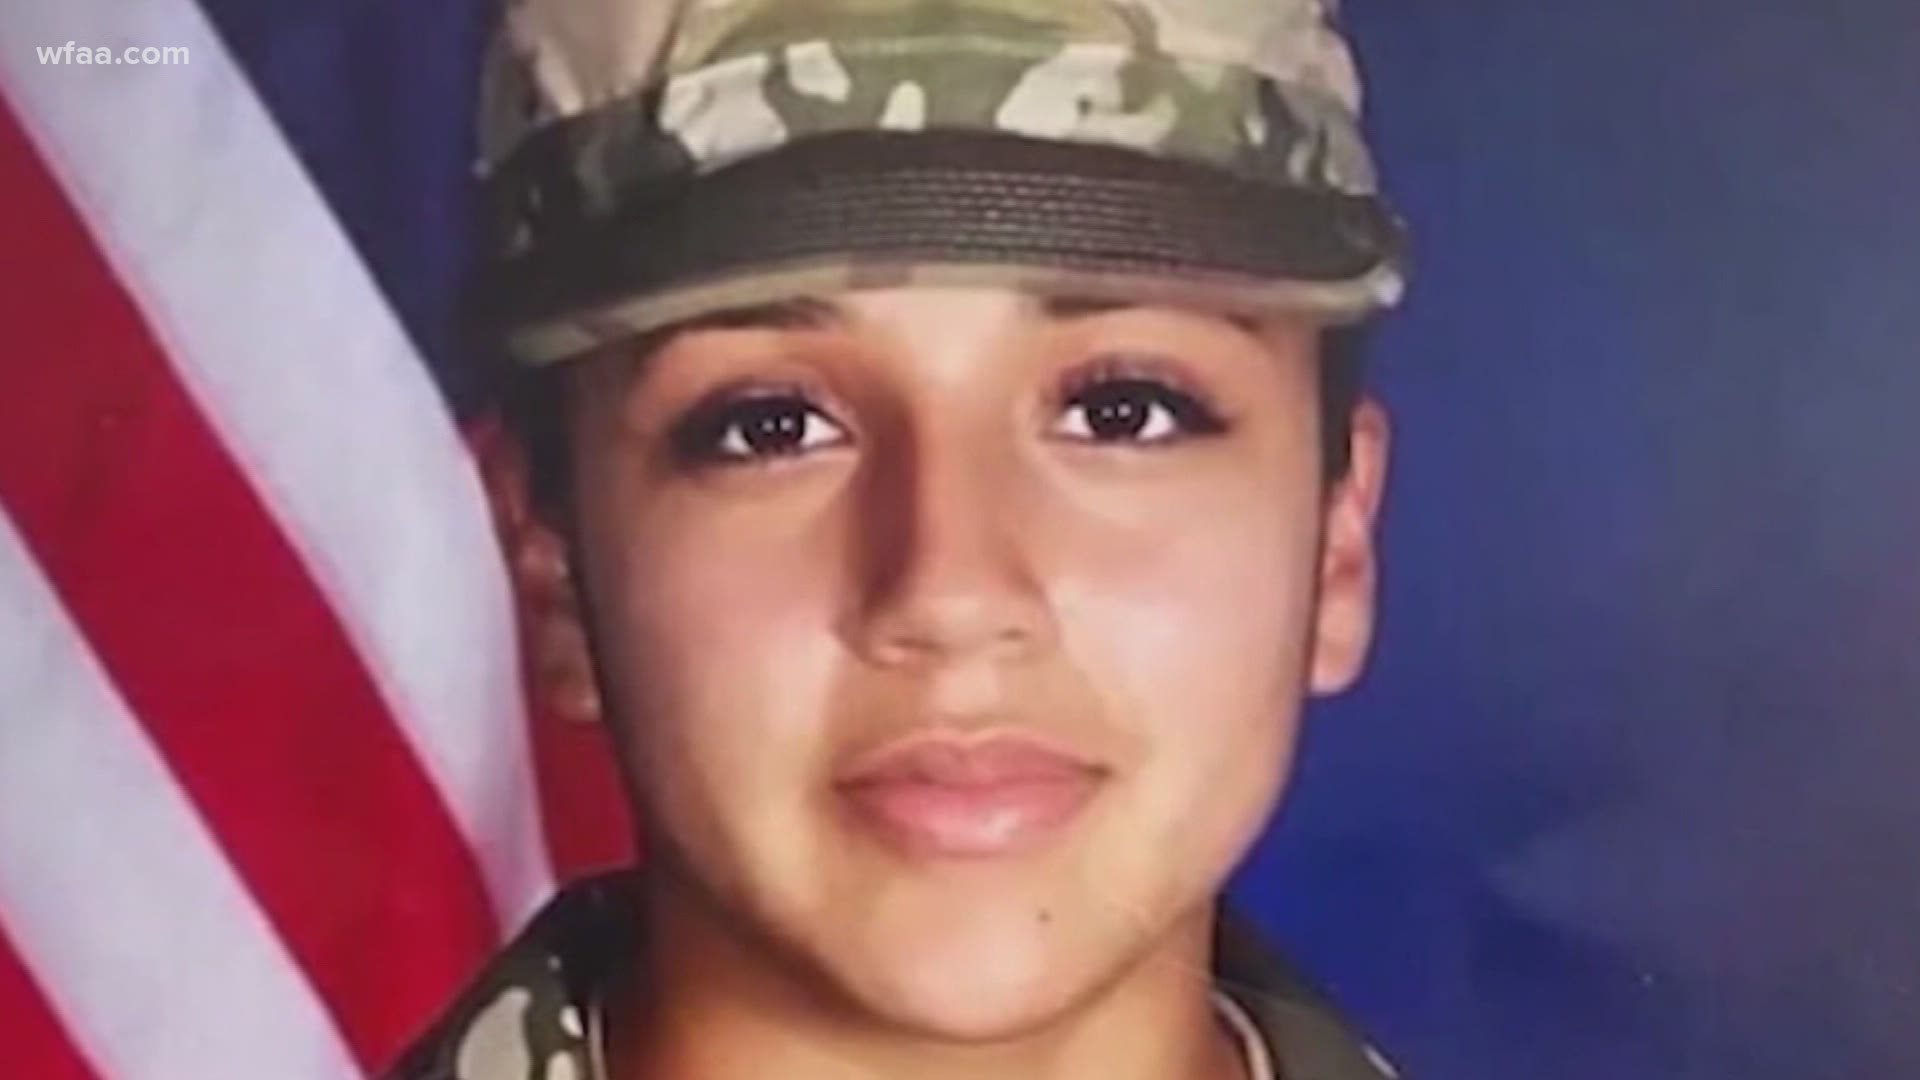 LULAC National President Domingo Garcia says the military is not protecting female soldiers. Vanessa Guillen disappeared from Fort Hood two months ago.